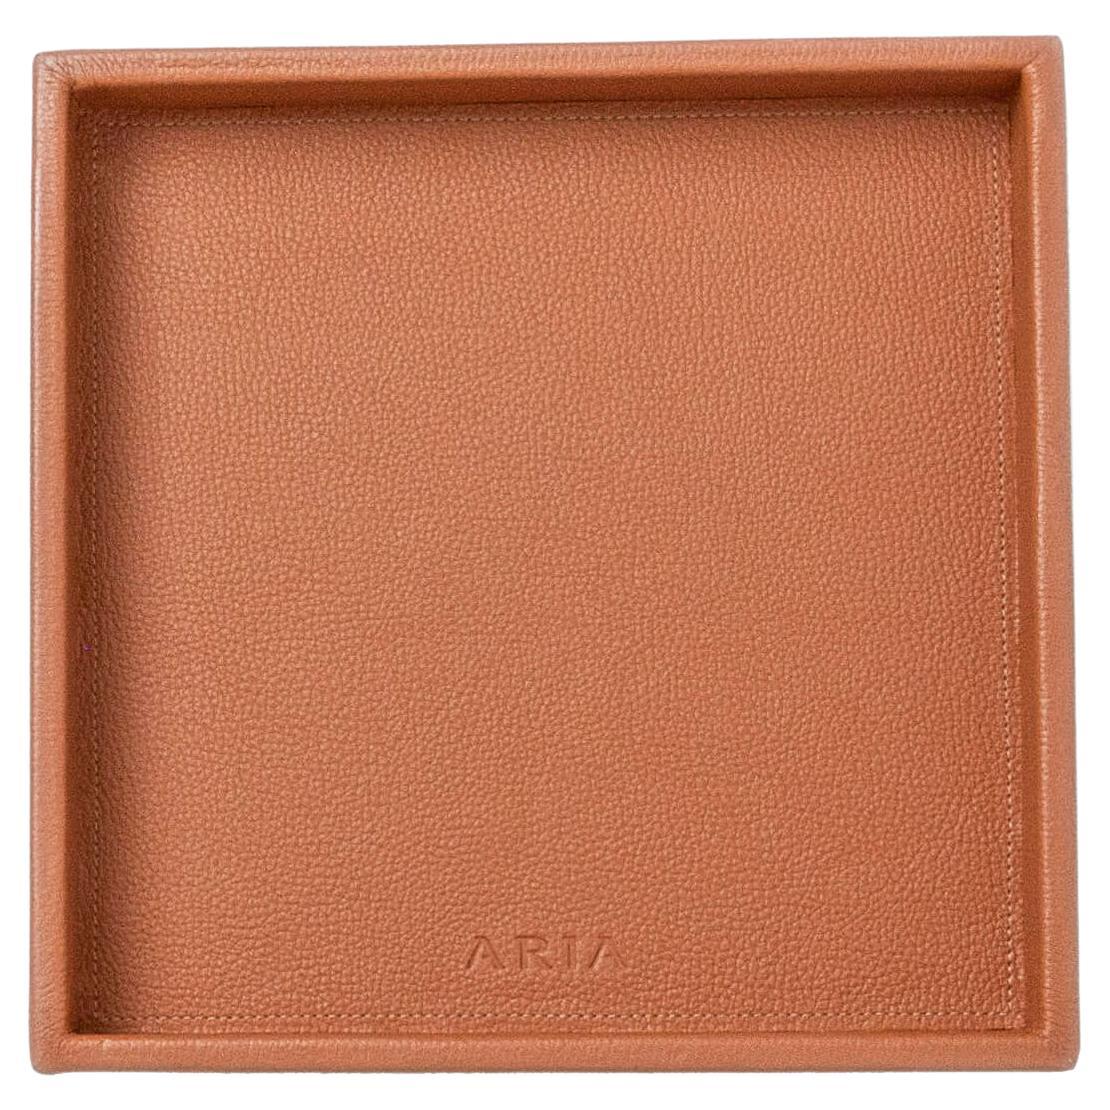 Modern Leather Tray, Medium Square Tray, Handmade in Brazil - Color: Savannah For Sale